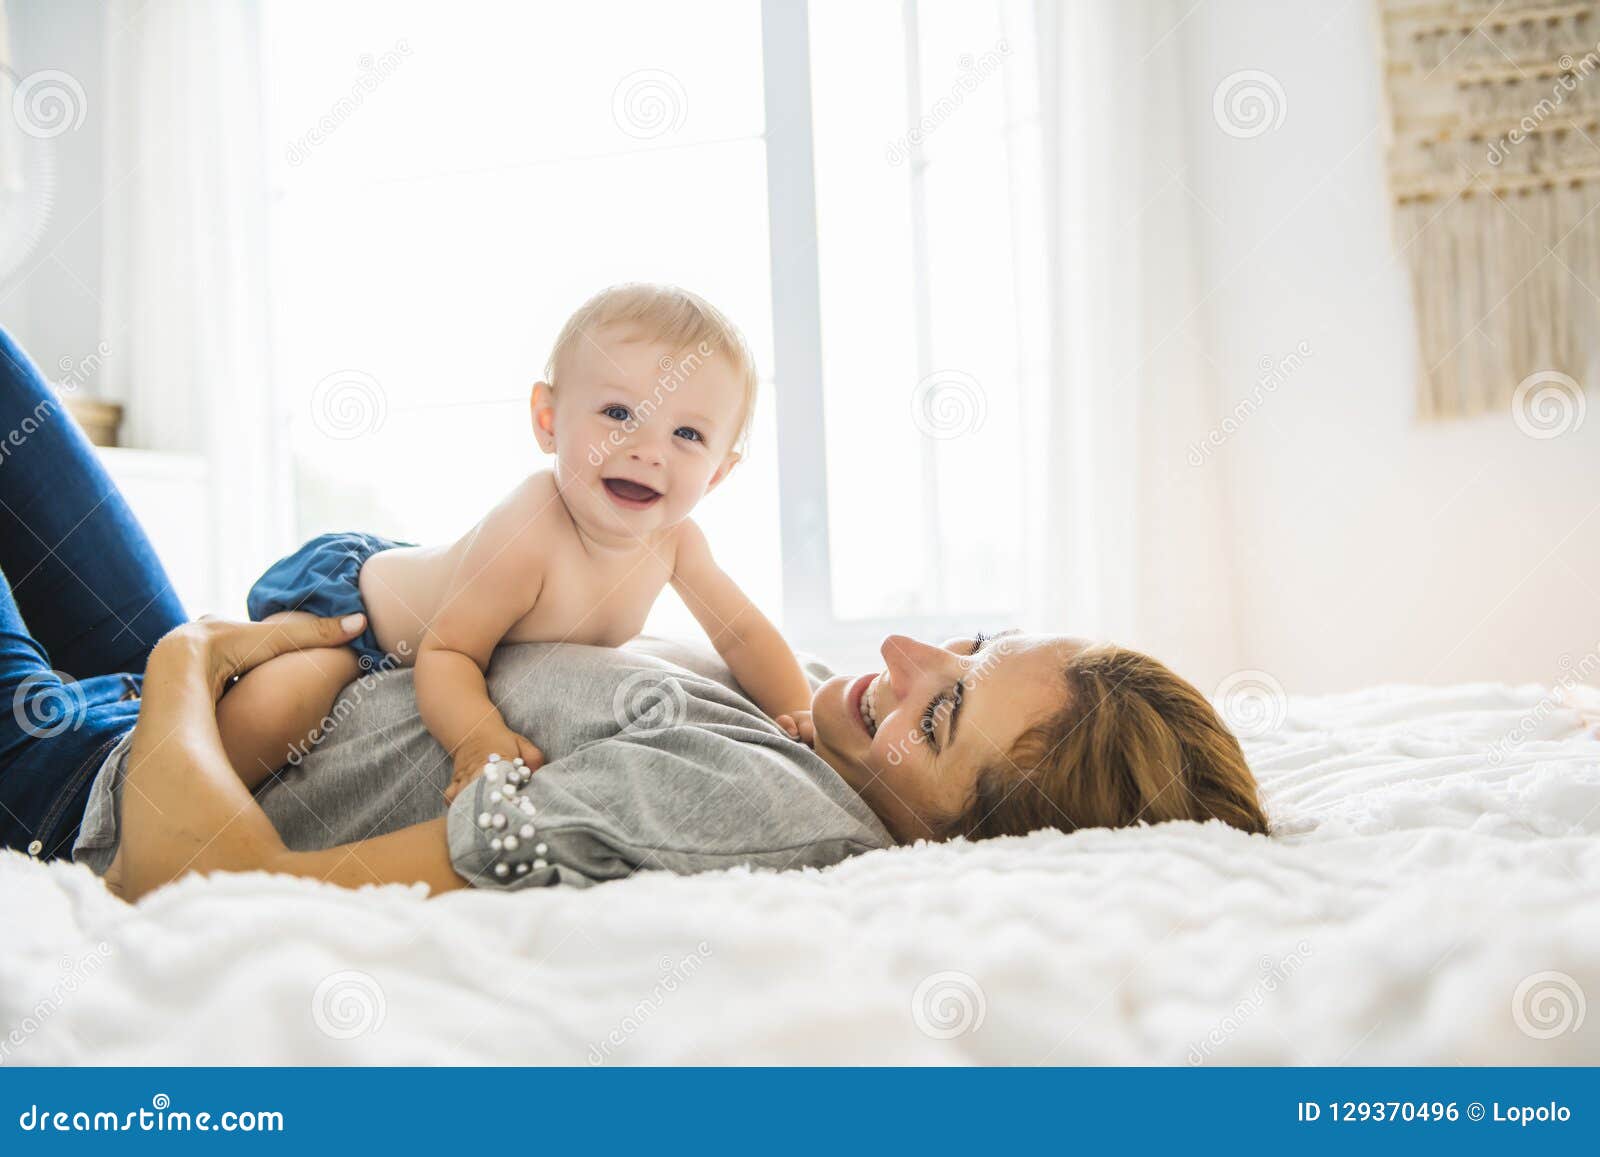 Mother and Baby Girl on Bed Stock Photo - Image of hand, interior ...